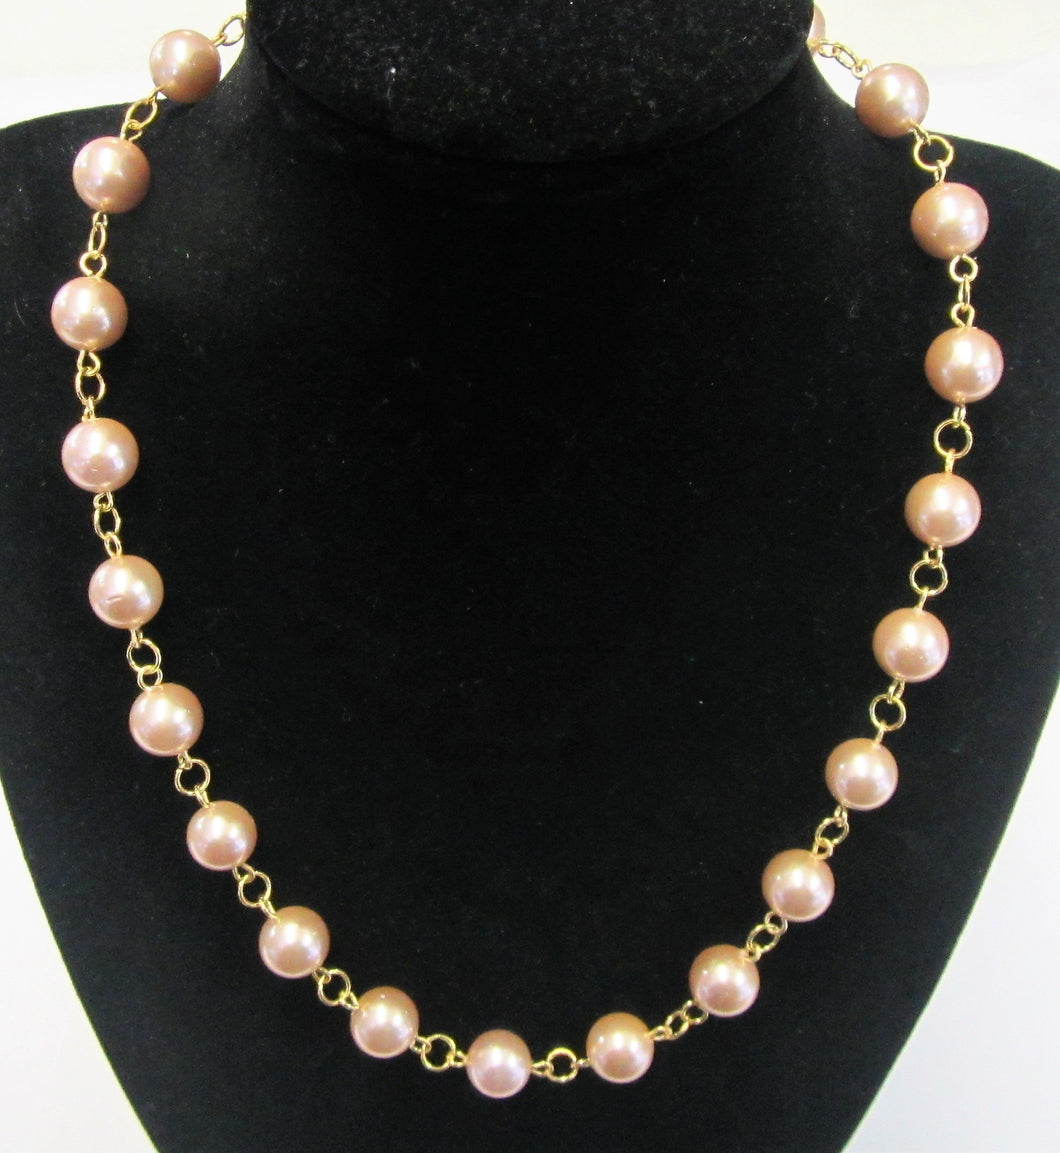 Beautiful handcrafted rose quartz necklace with clip clasp